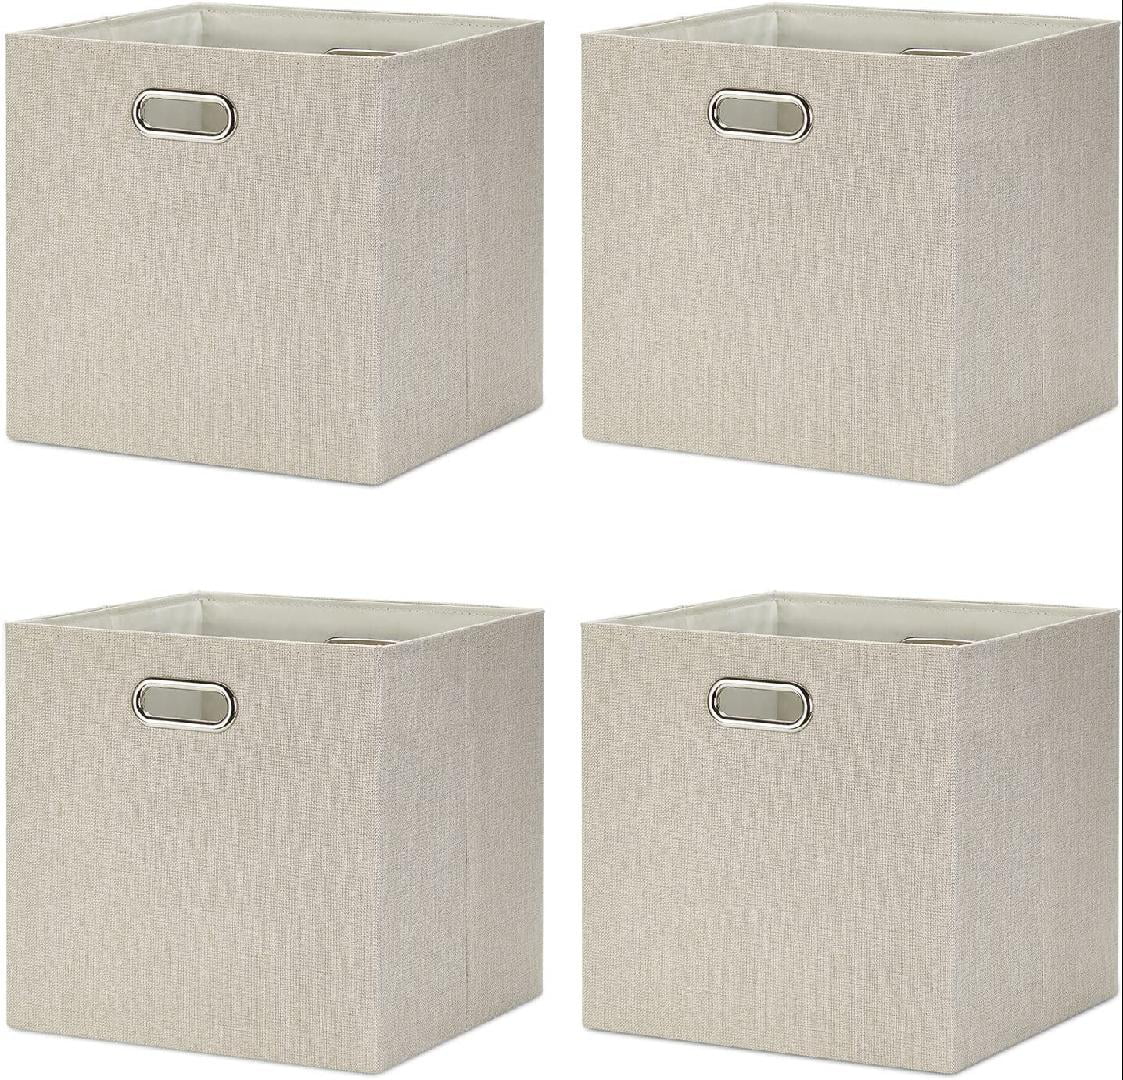  DULLEMELO 12x12x12 Storage Cube Bins, Organization and Storage  Bins with Handles for Organizing Book Clothes in the Office, Home, Canvas Storage  Bin for Toys Storage, Organizing Baskets for Shelves